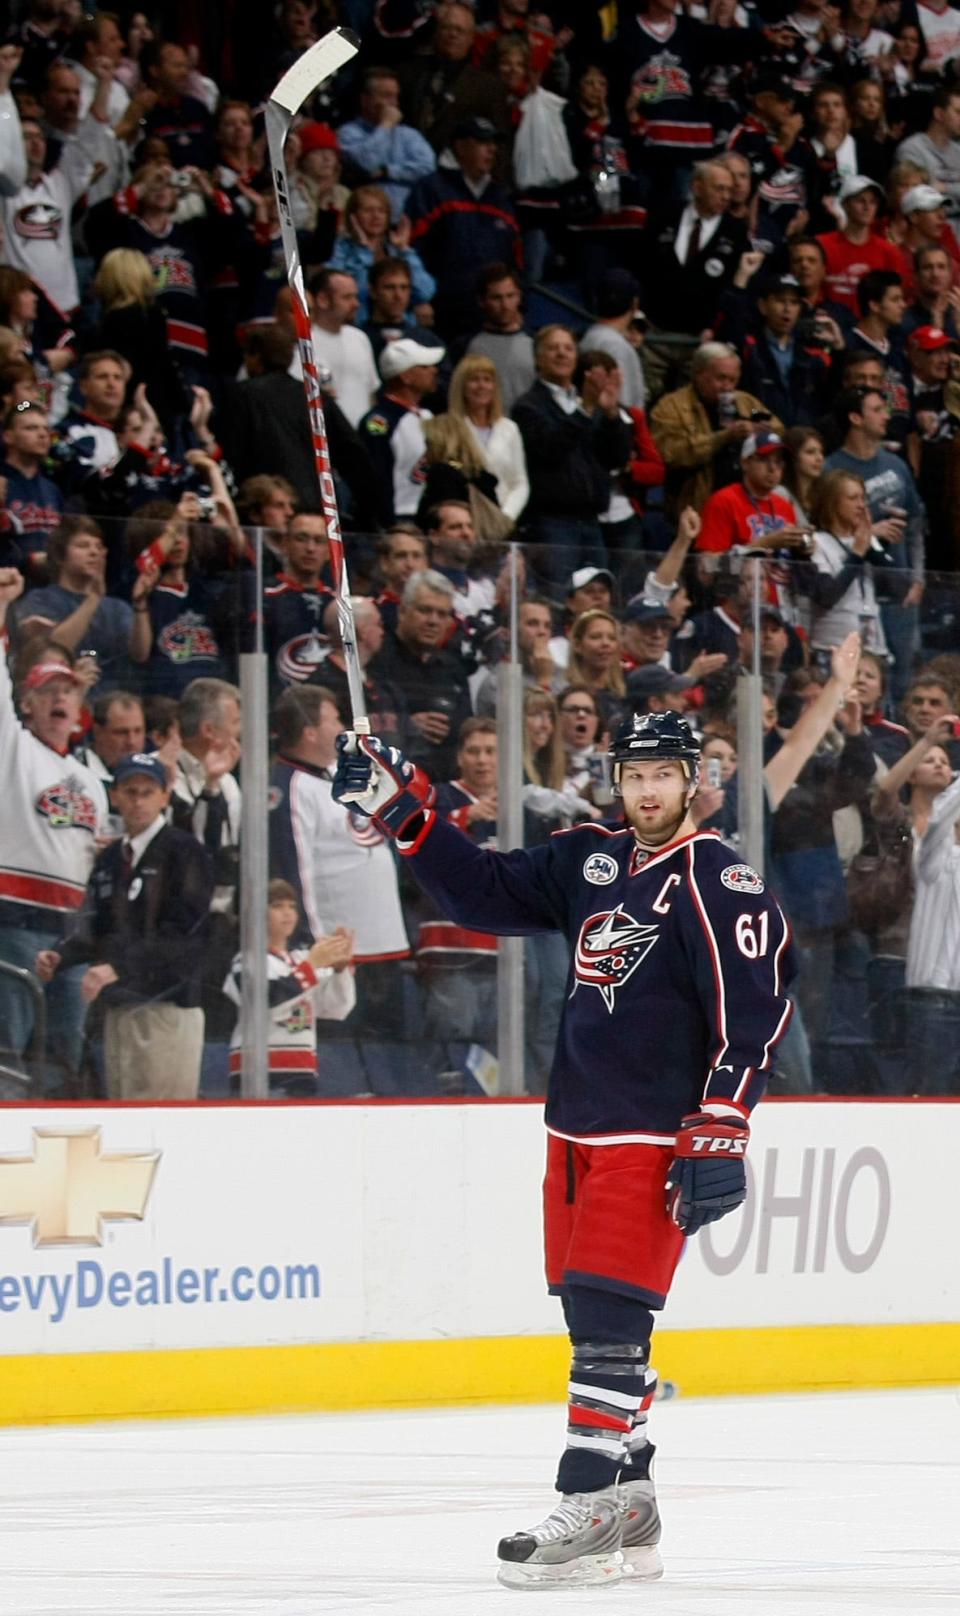 Rick Nash, shown here in 2009, represented the Blue Jackets in five NHL All-Star Games.